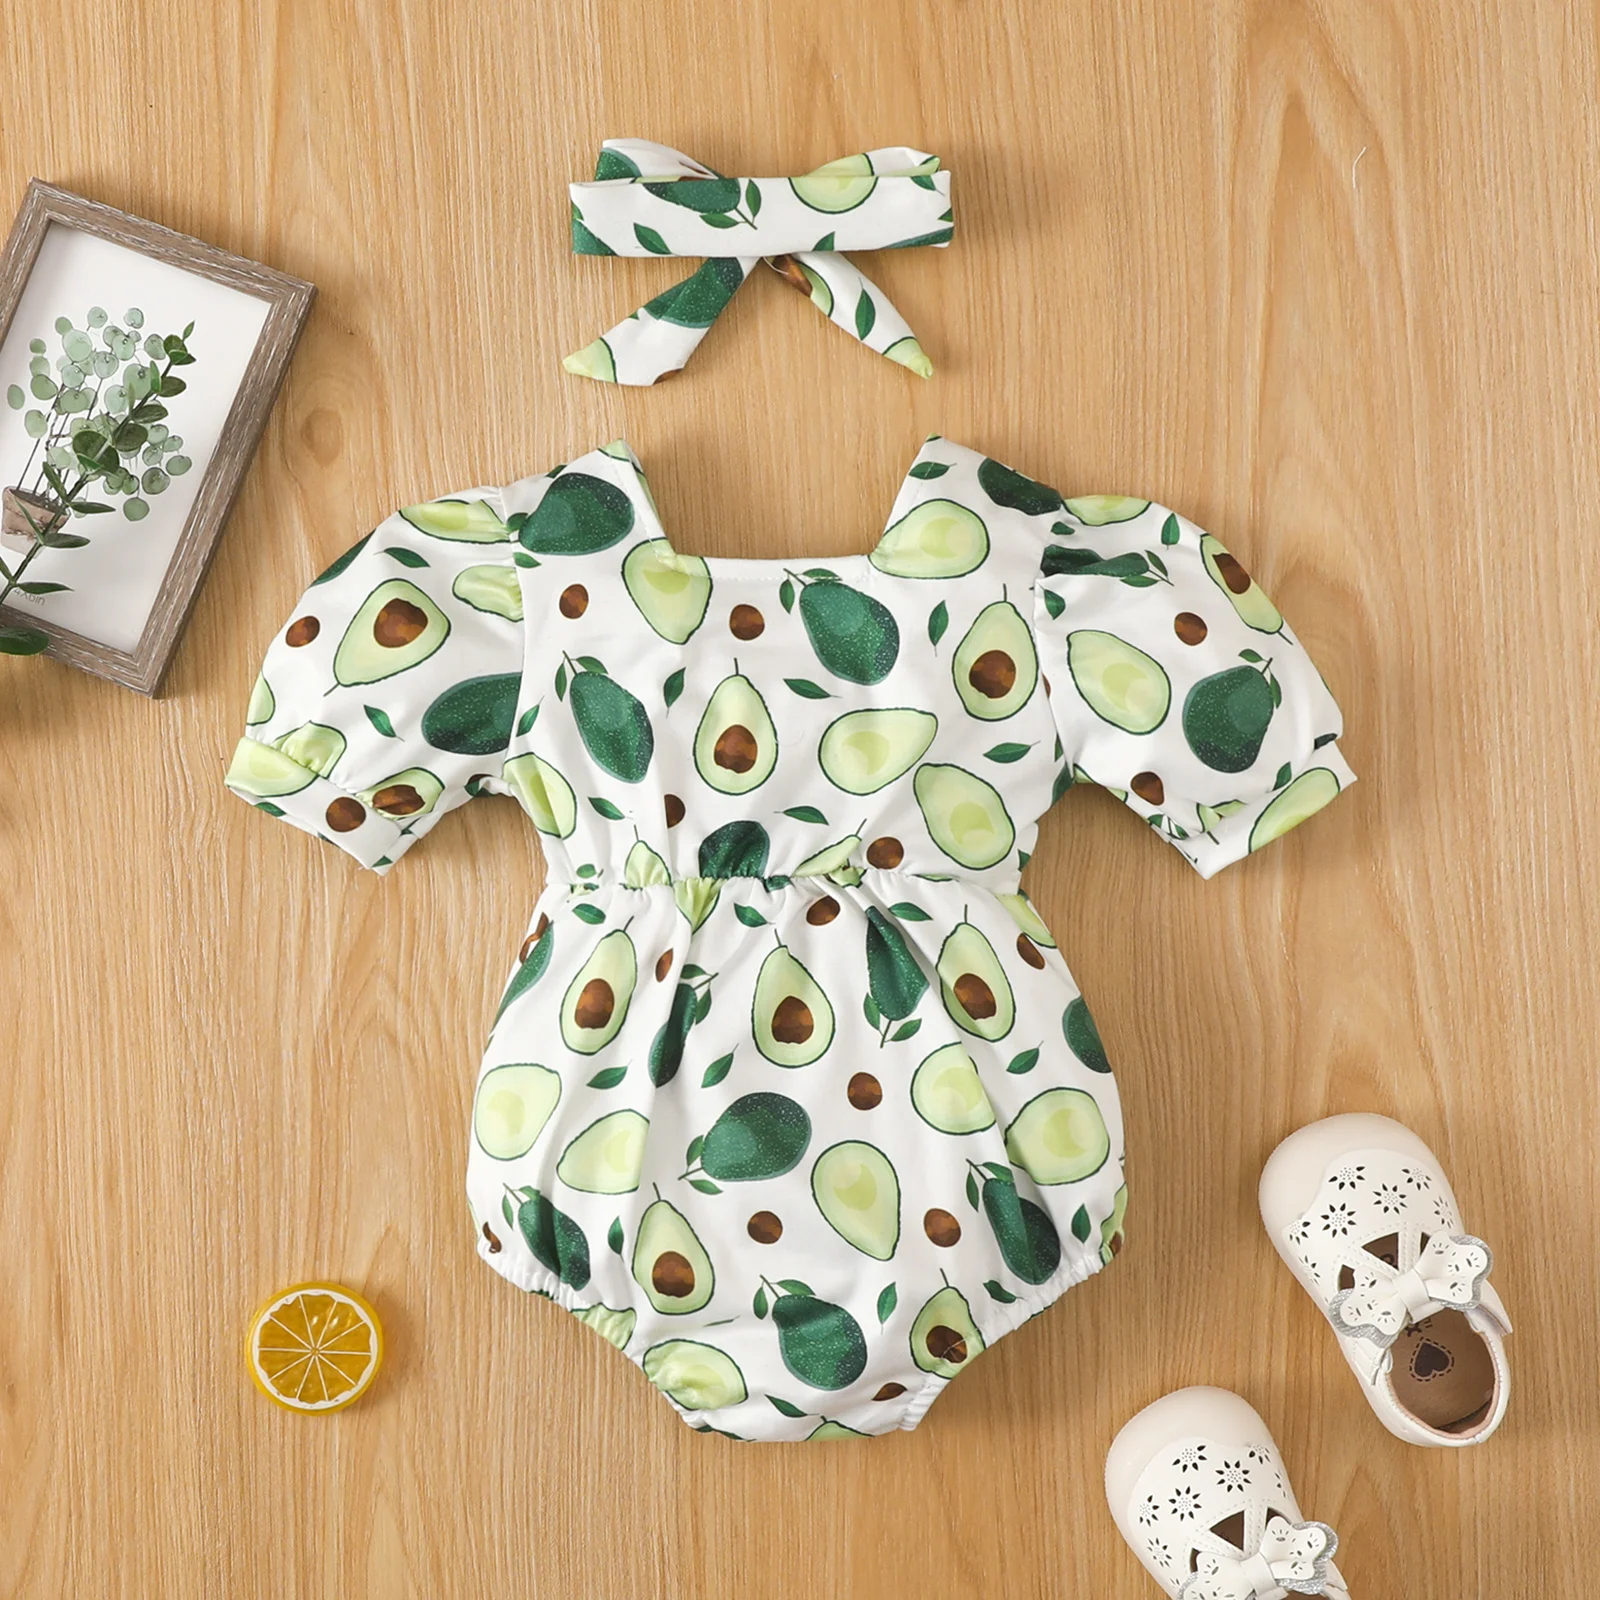 Ma&Baby 0-24M Newborn Infant Baby Girls Romper Short Sleeve Avocado PrintJumpsuit Playsuit Summer Outfits  D01 Baby Jumpsuit Cotton 